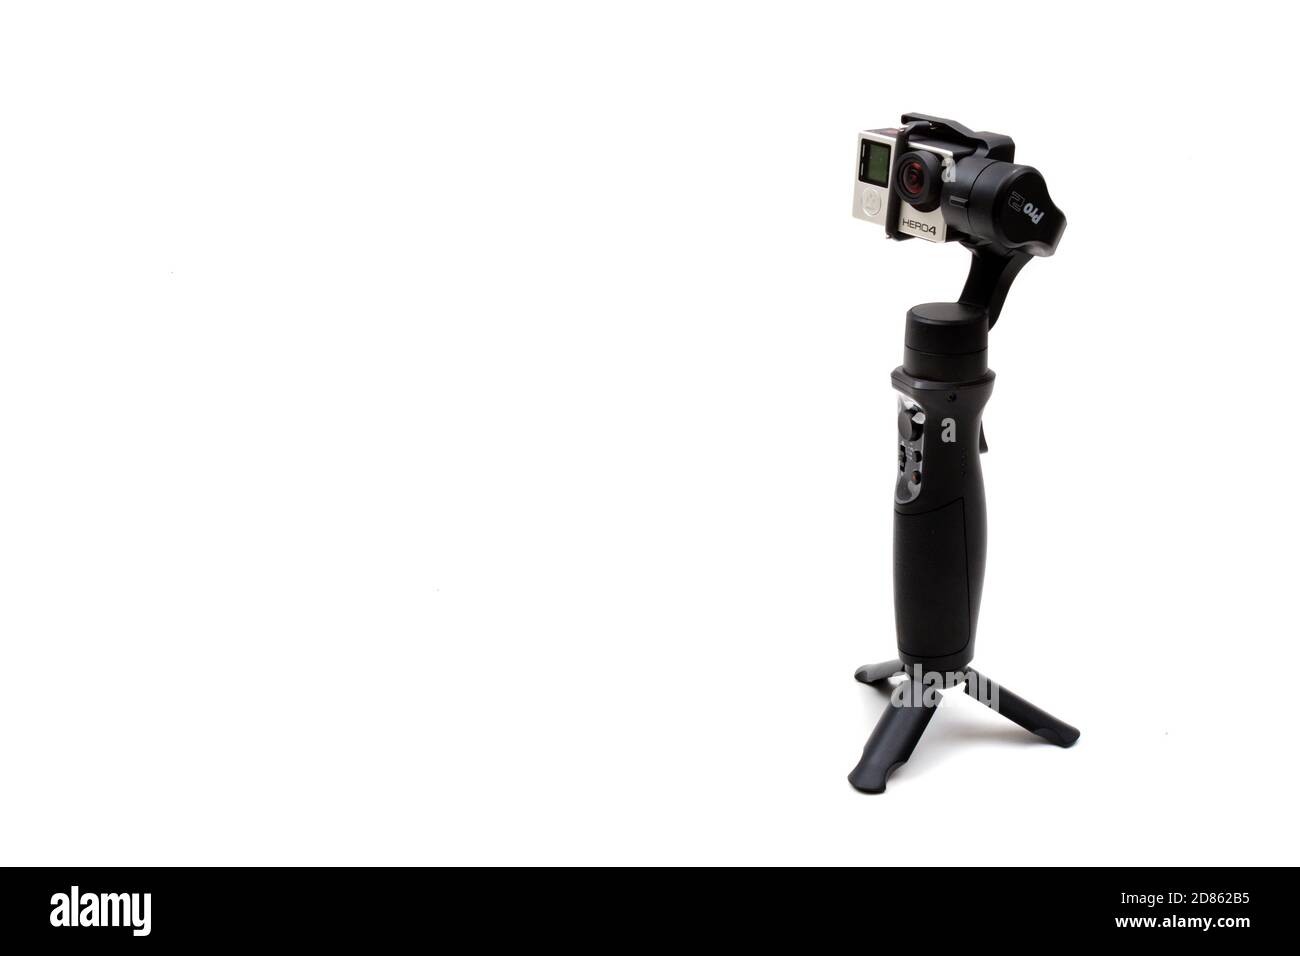 London, United Kingdom, 21st September 2020:- An isteady gimbal with a GoPro Hero4 camera isolated on a white background Stock Photo